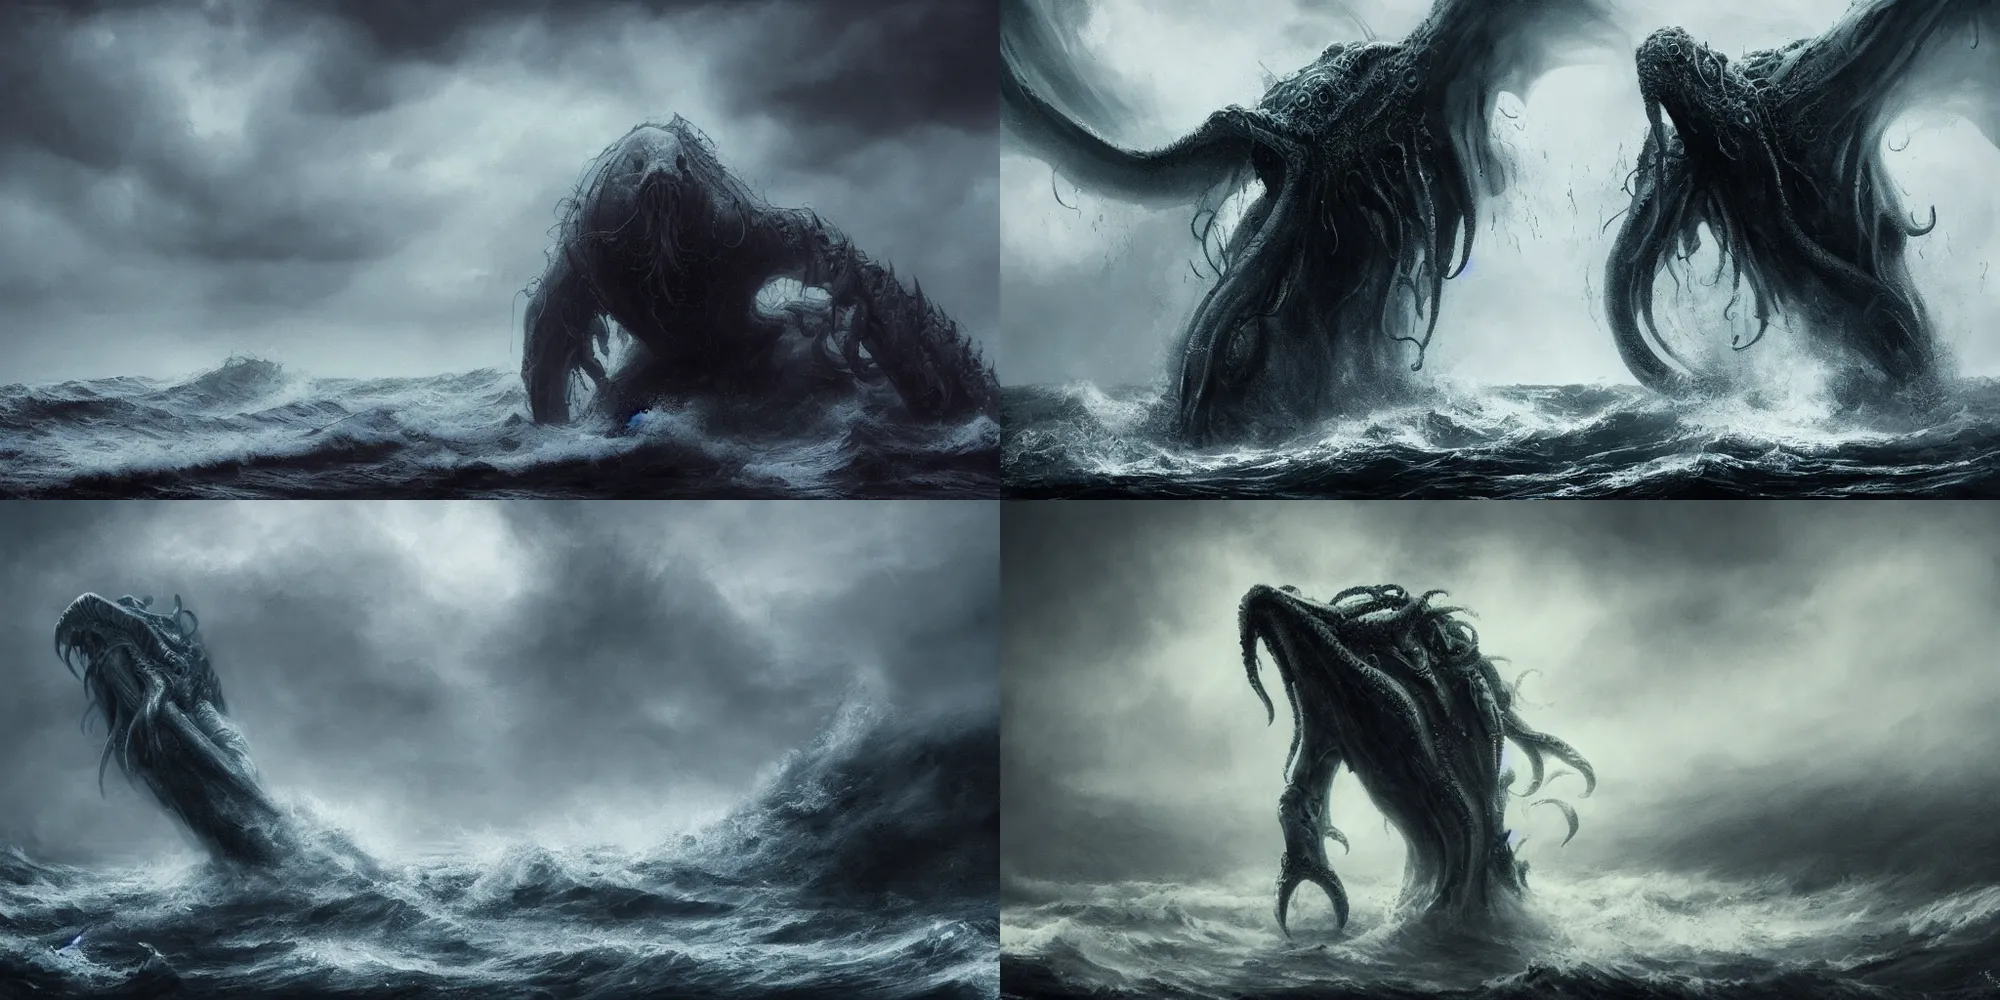 Prompt: epic image of gigantic cthulhu emerging from the ocean, fog, rain, ocean spray and waves, in the style of andree wallin and ben templesmith, dark, dramatic, moody